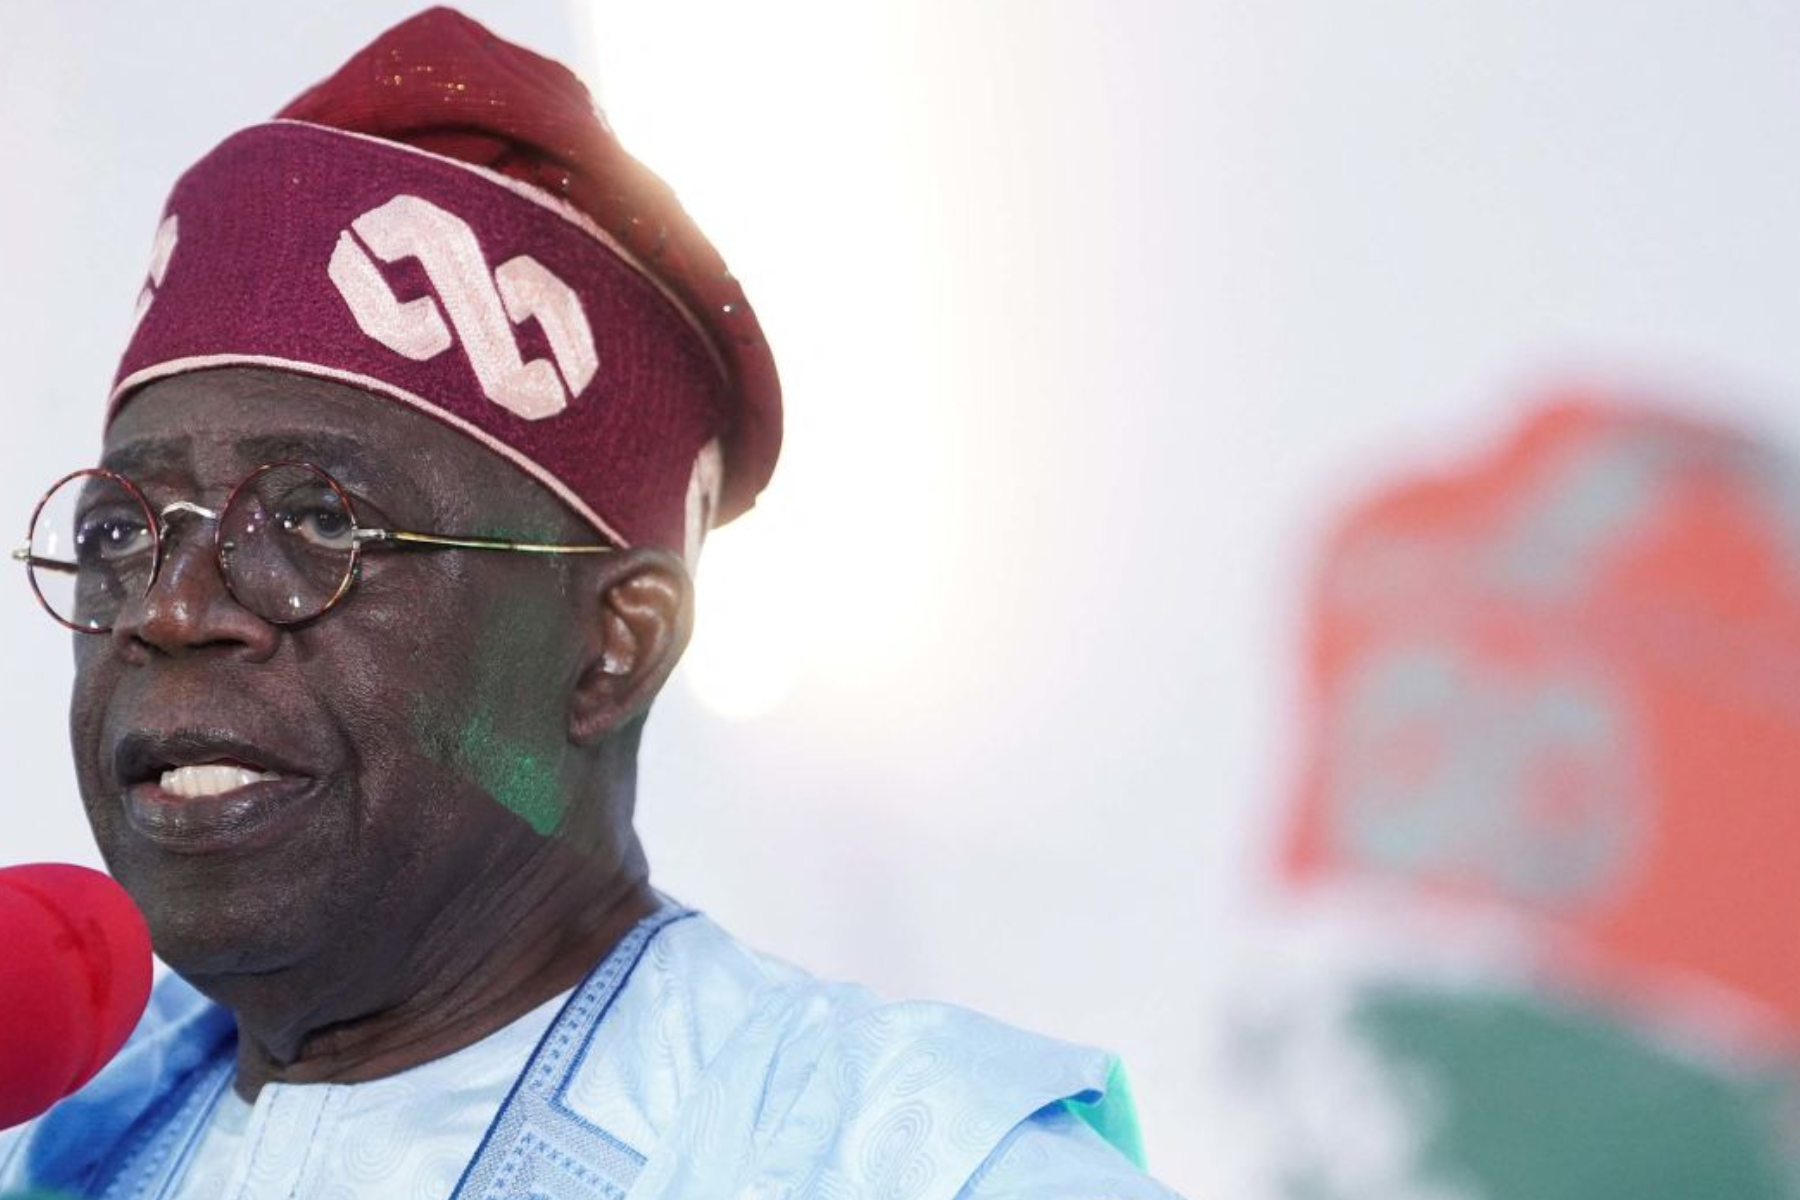 Nigeria’s Bola Tinubu Sworn In As President, Facing Divided Nation And Economic Woes